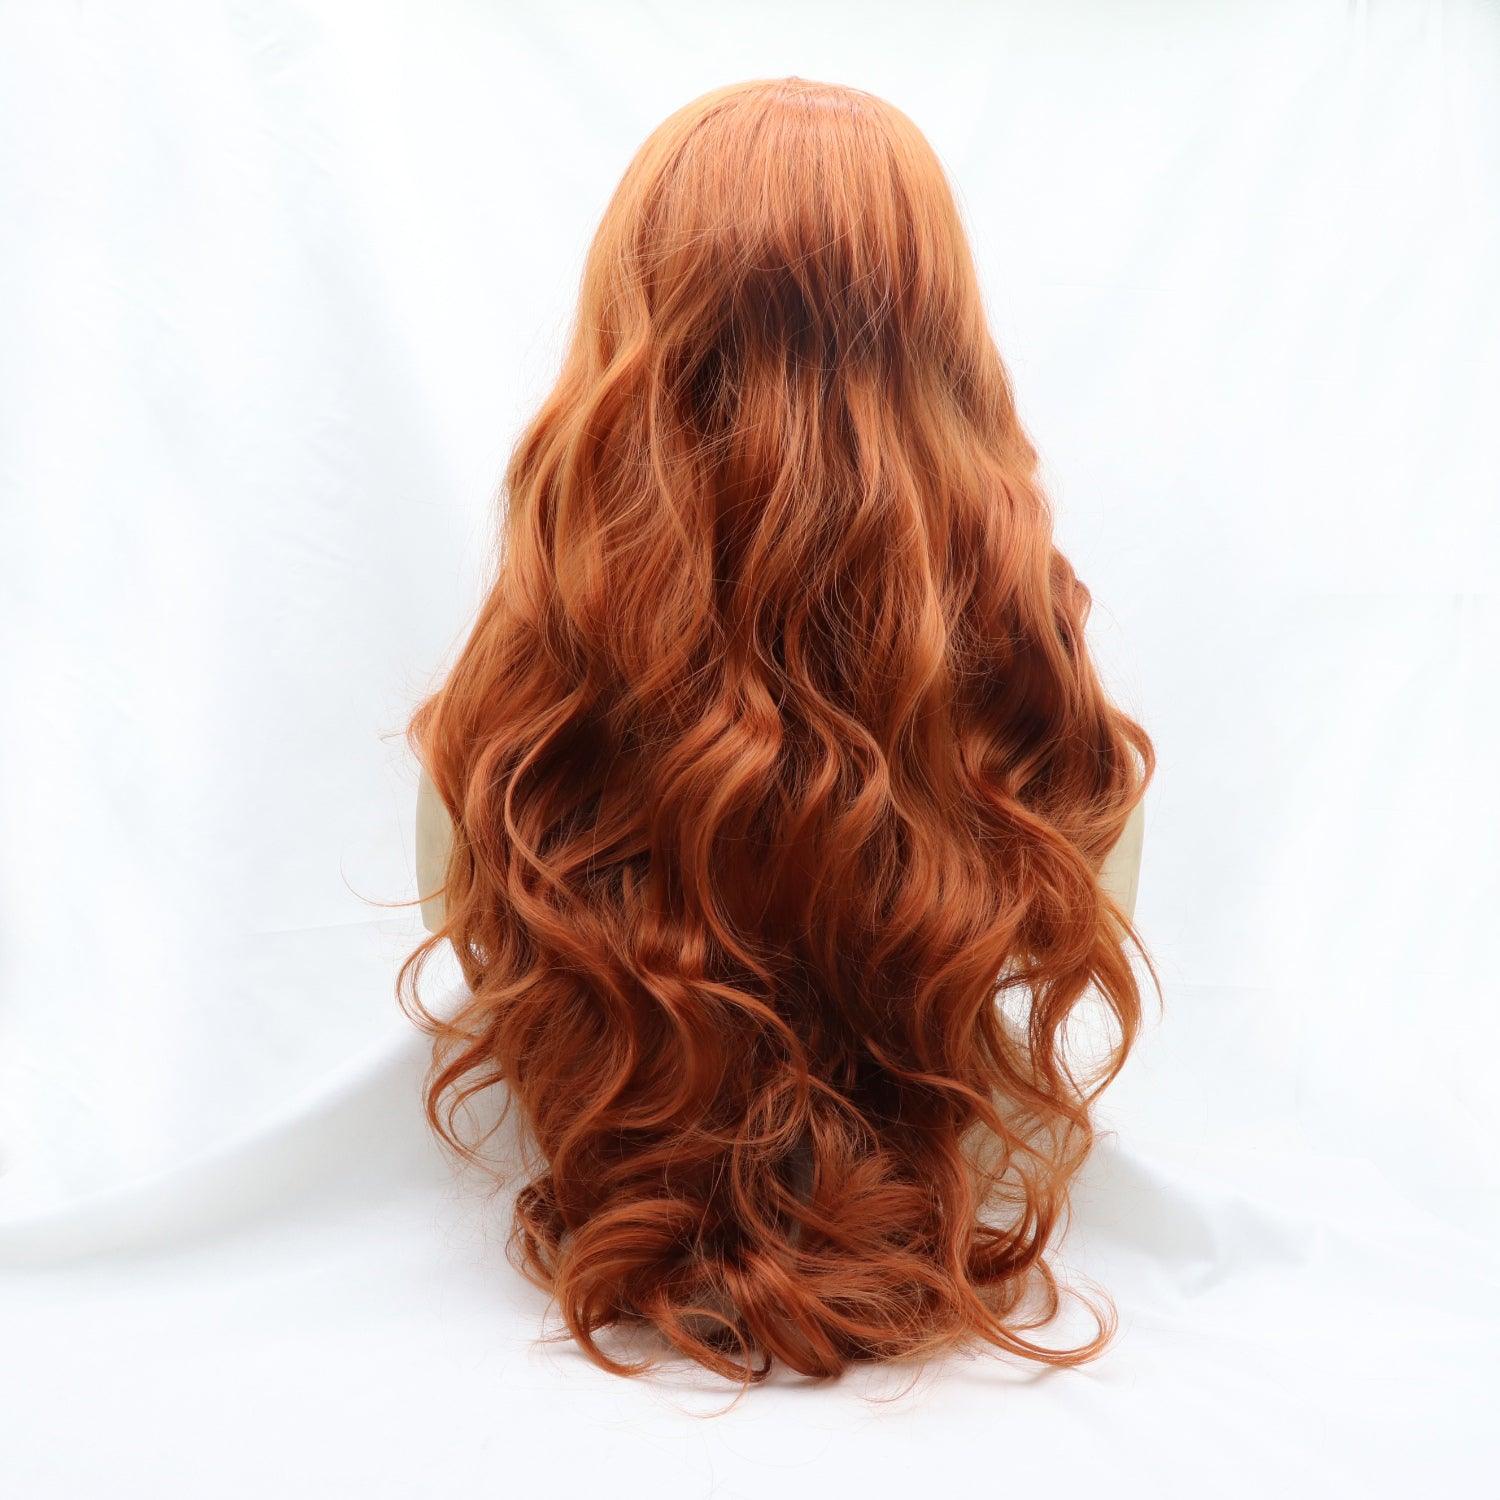 a woman's long red curly hair on a white background